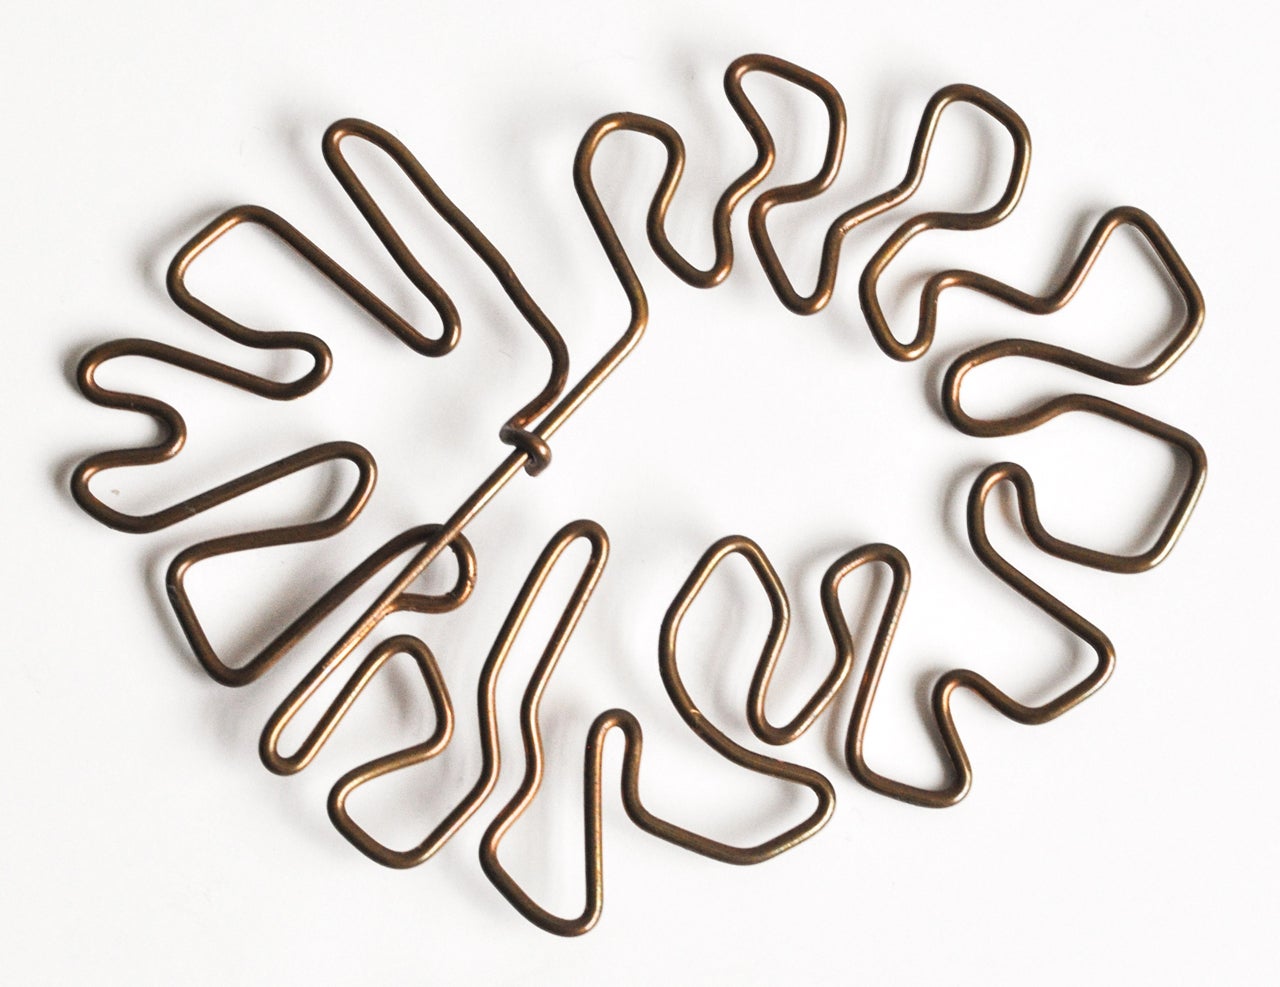 A large abstract brooch by Val Bertoia (b.1949). Free-form bronze wire with etched number documenting this work.  An innovative, organic design with an integrated clasp.

Included is a title of authentication by Val Bertoia